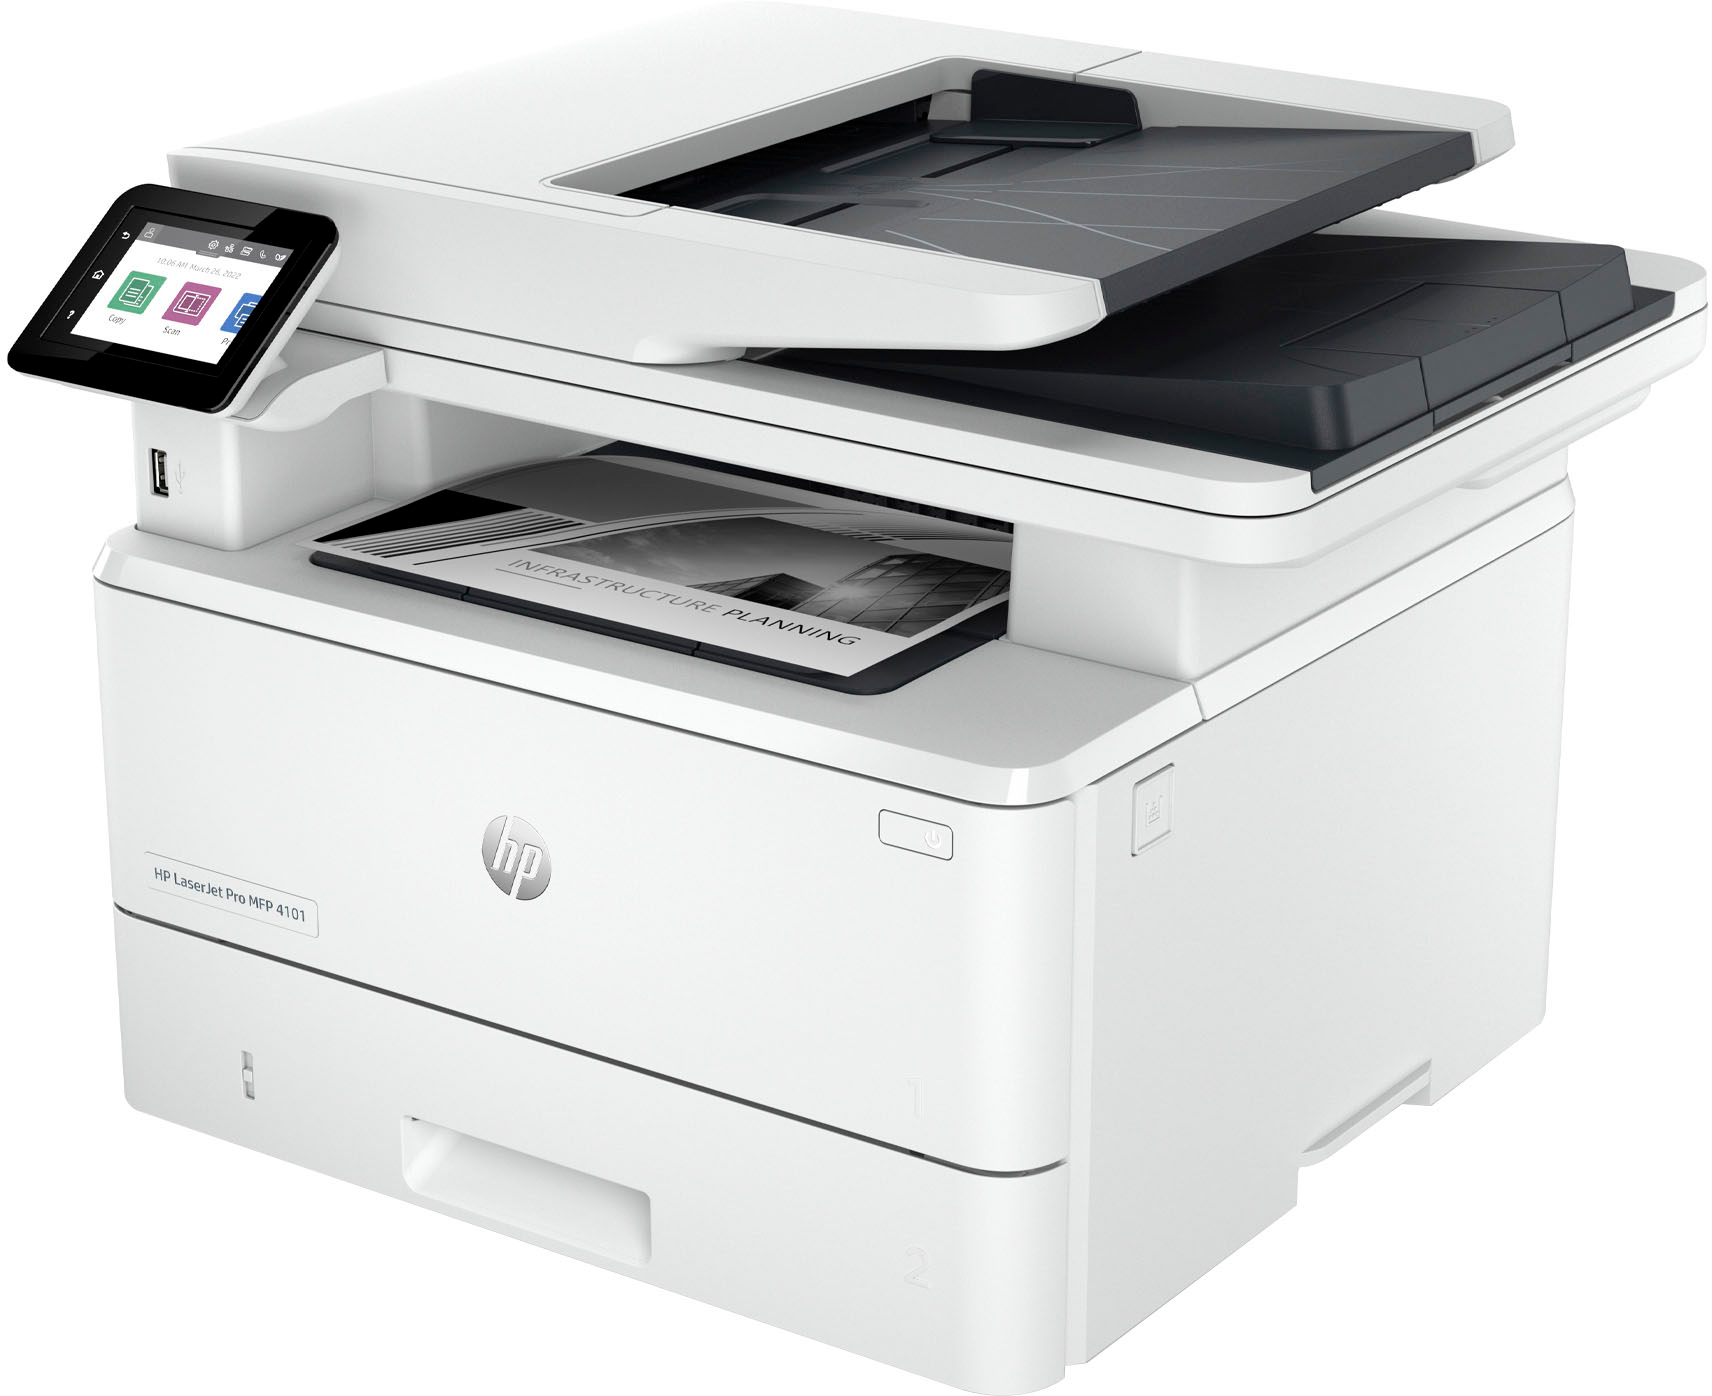 HP LaserJet Pro MFP 4101fdne Black-and-White Printer with 3 months of Instant Ink included with HP+ White LaserJet MFP 4101fdne Best Buy